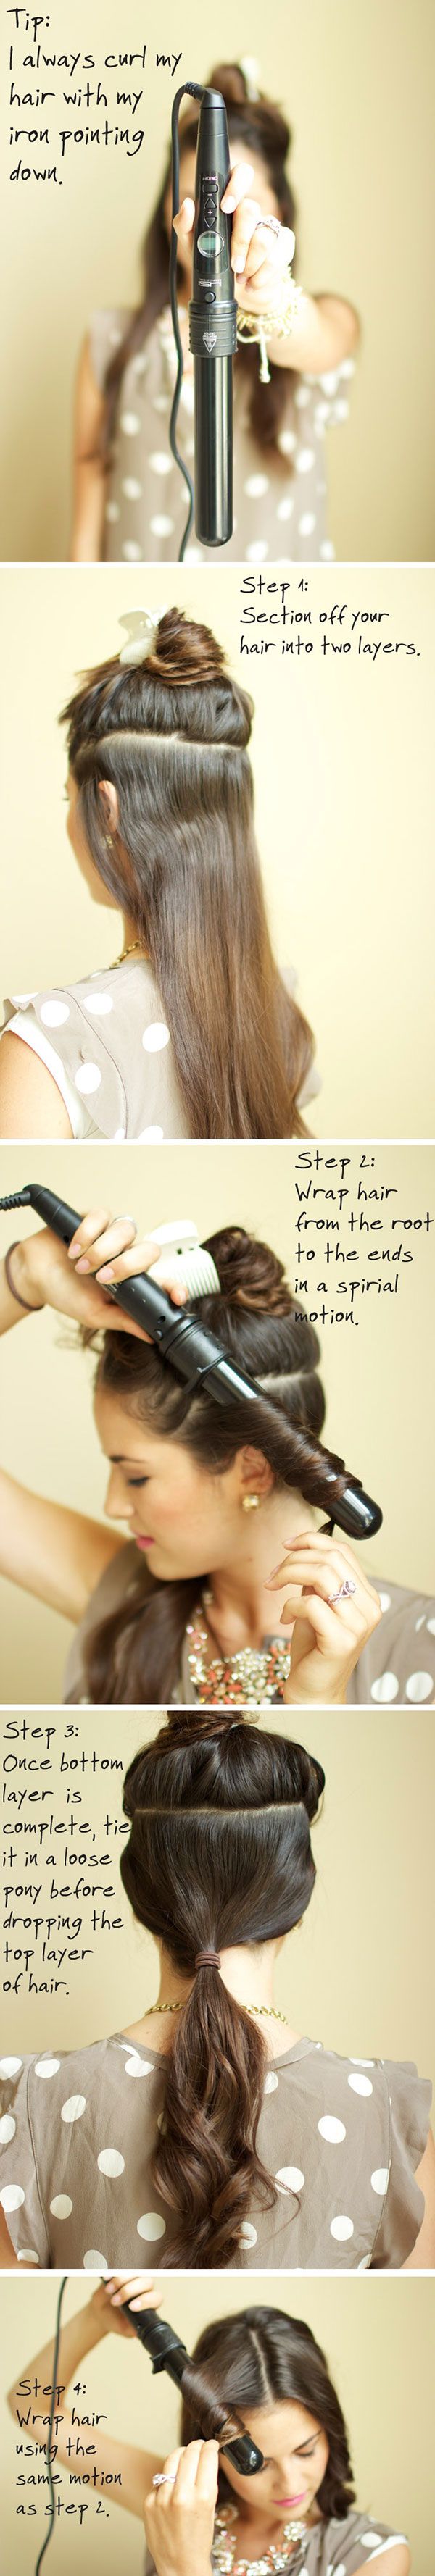 How to Curl Your Hair